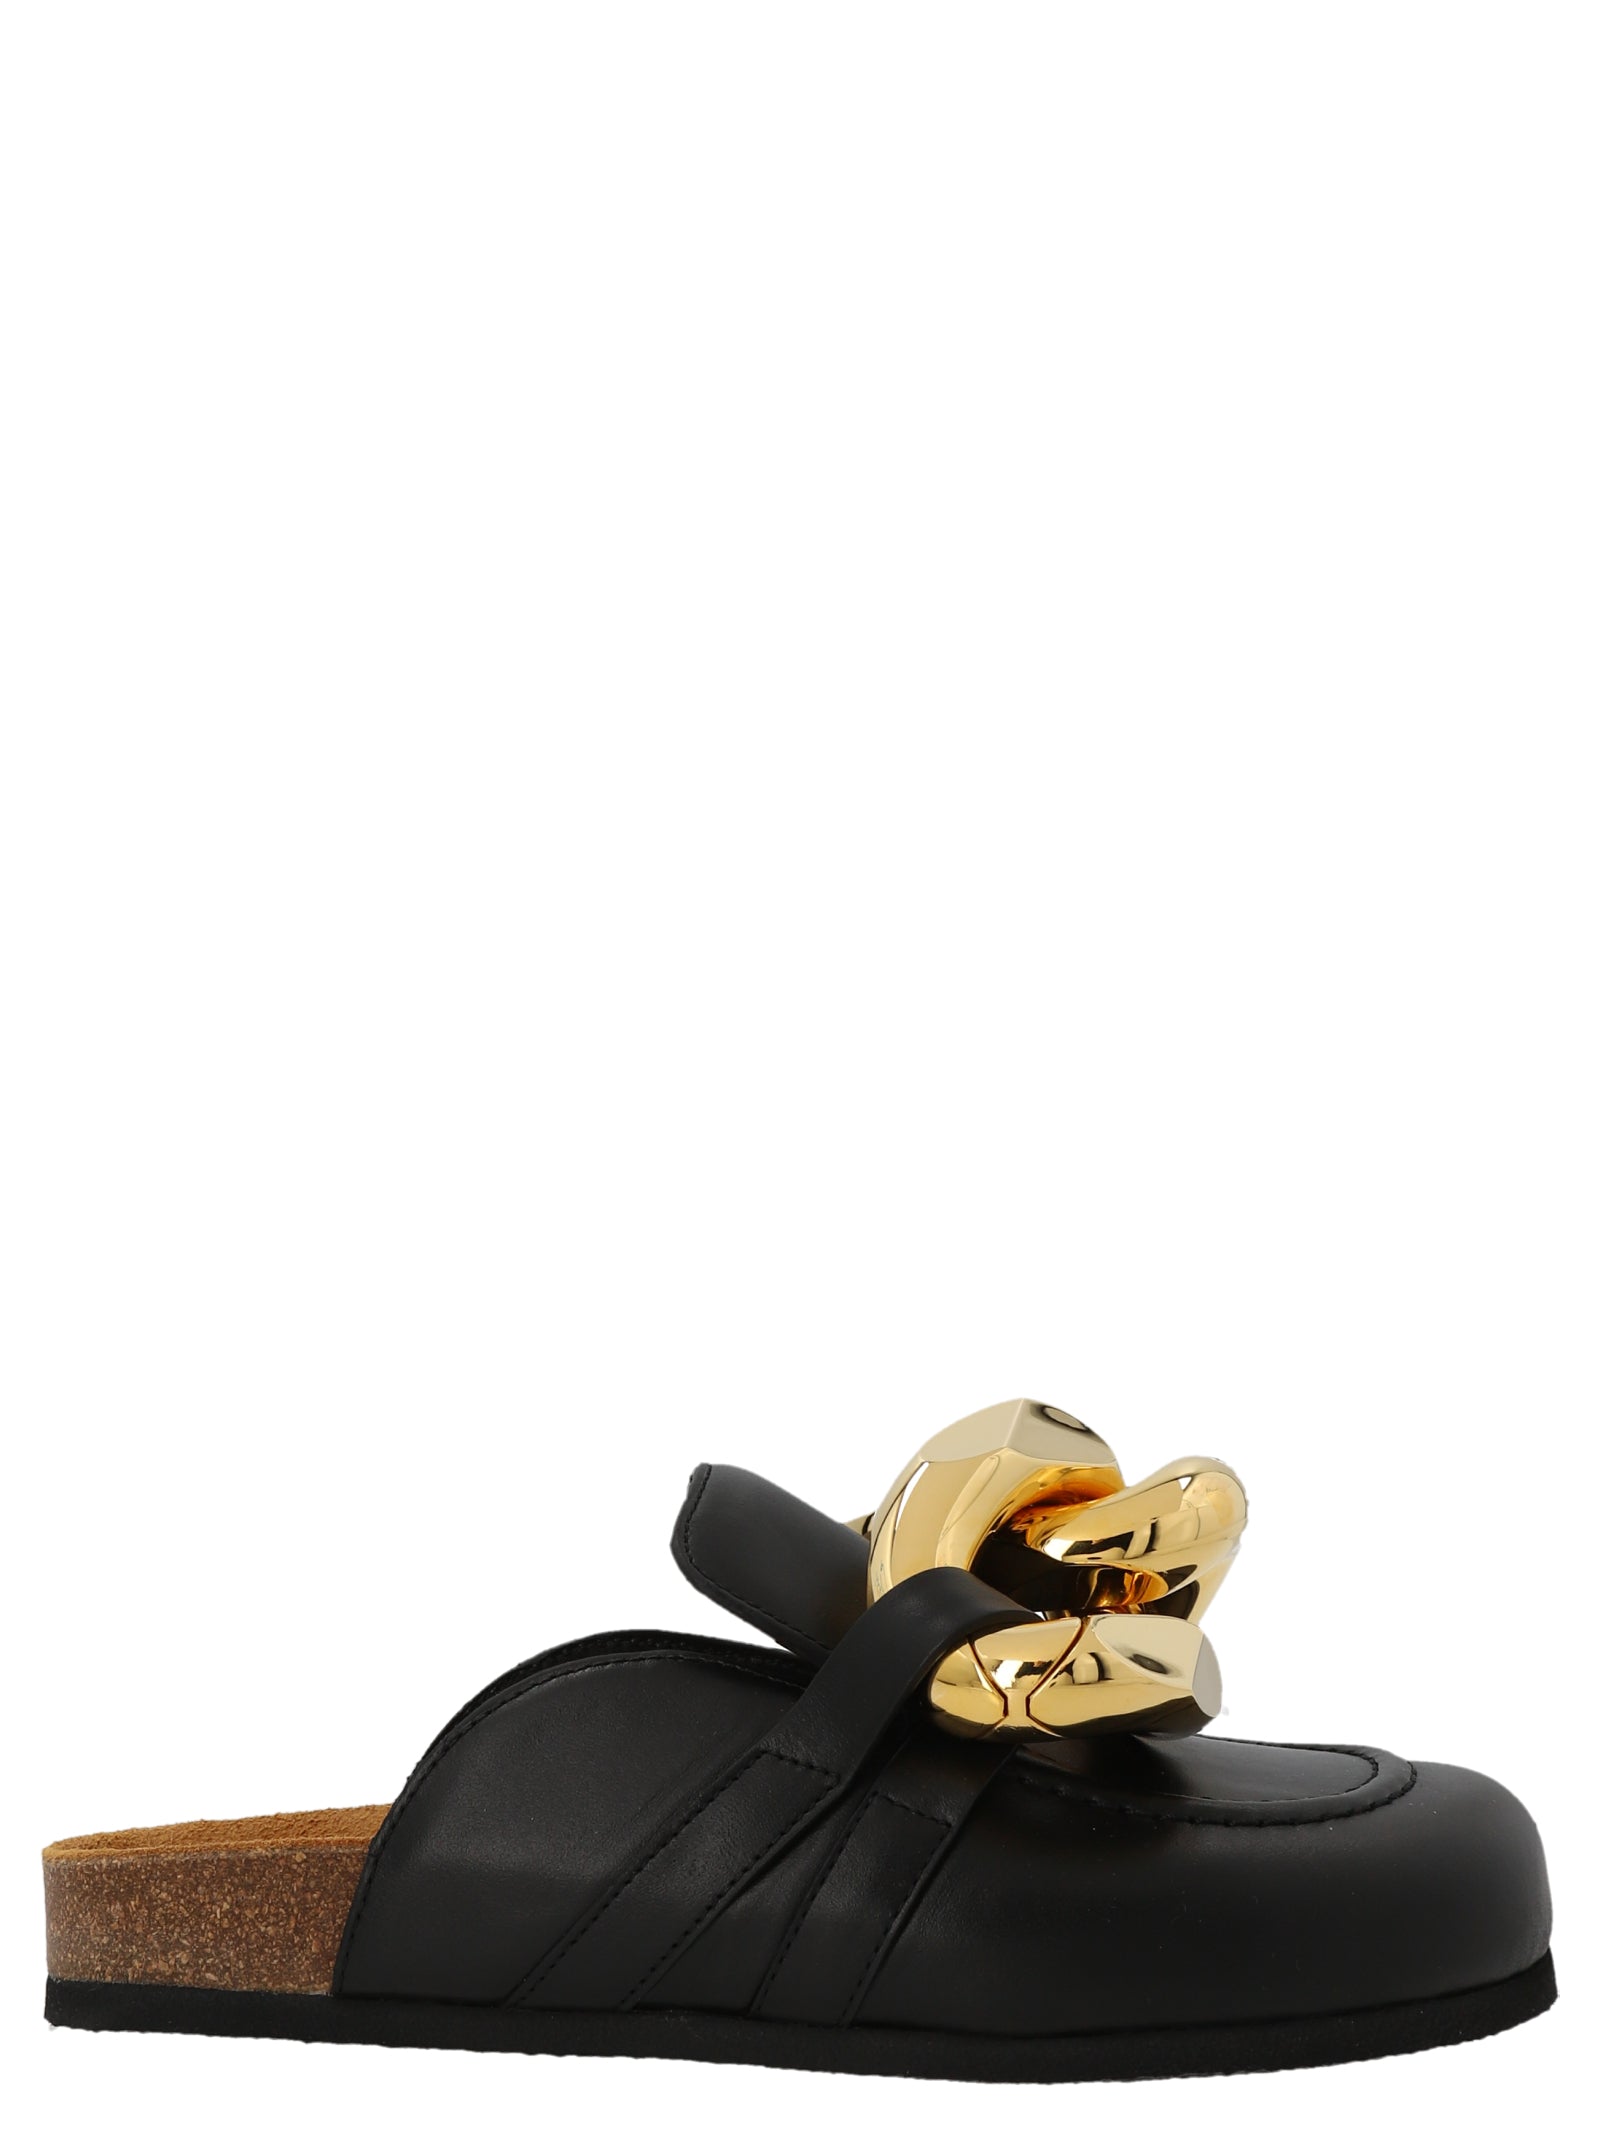 'Chain Loafer' mules